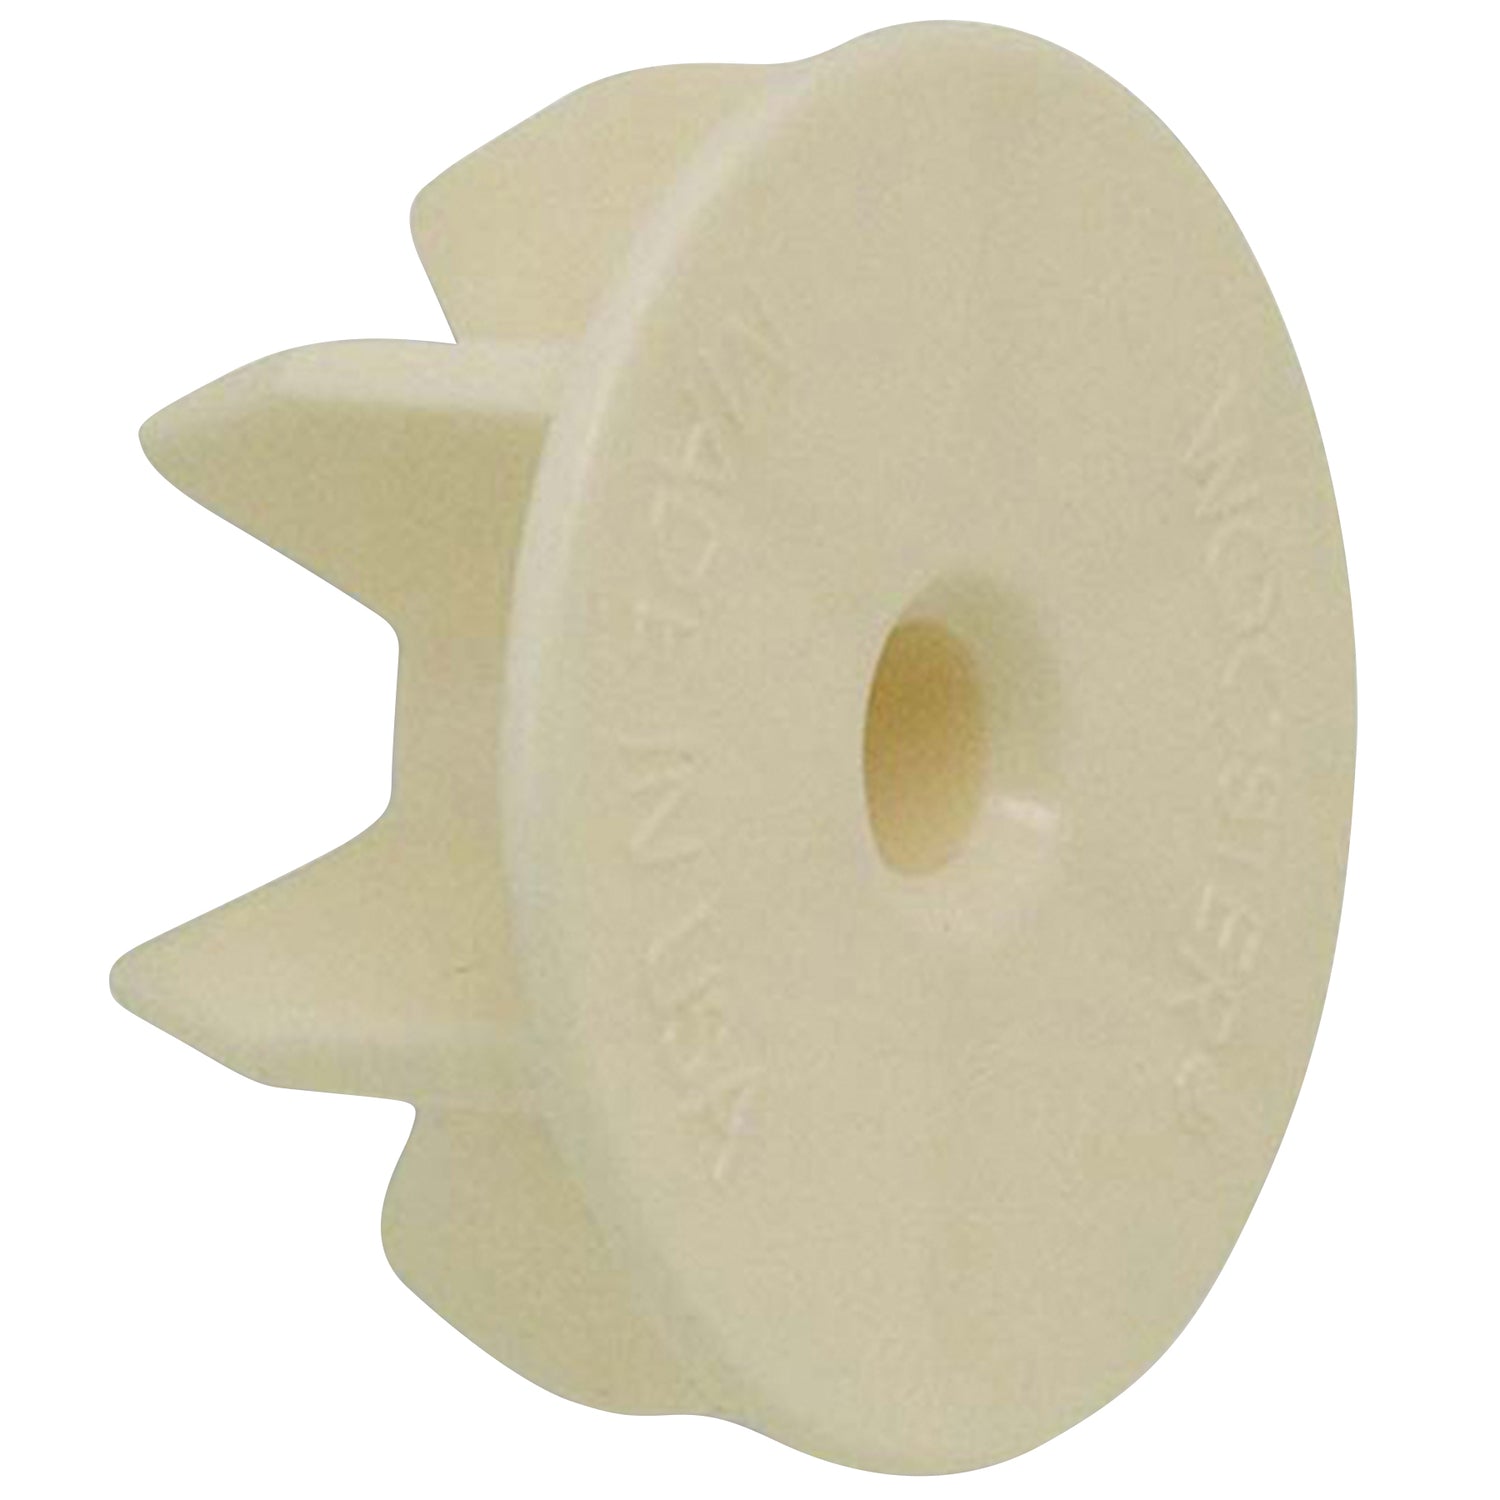 Wooster End Caps for Paint Roller Sleeves (2 Pack)